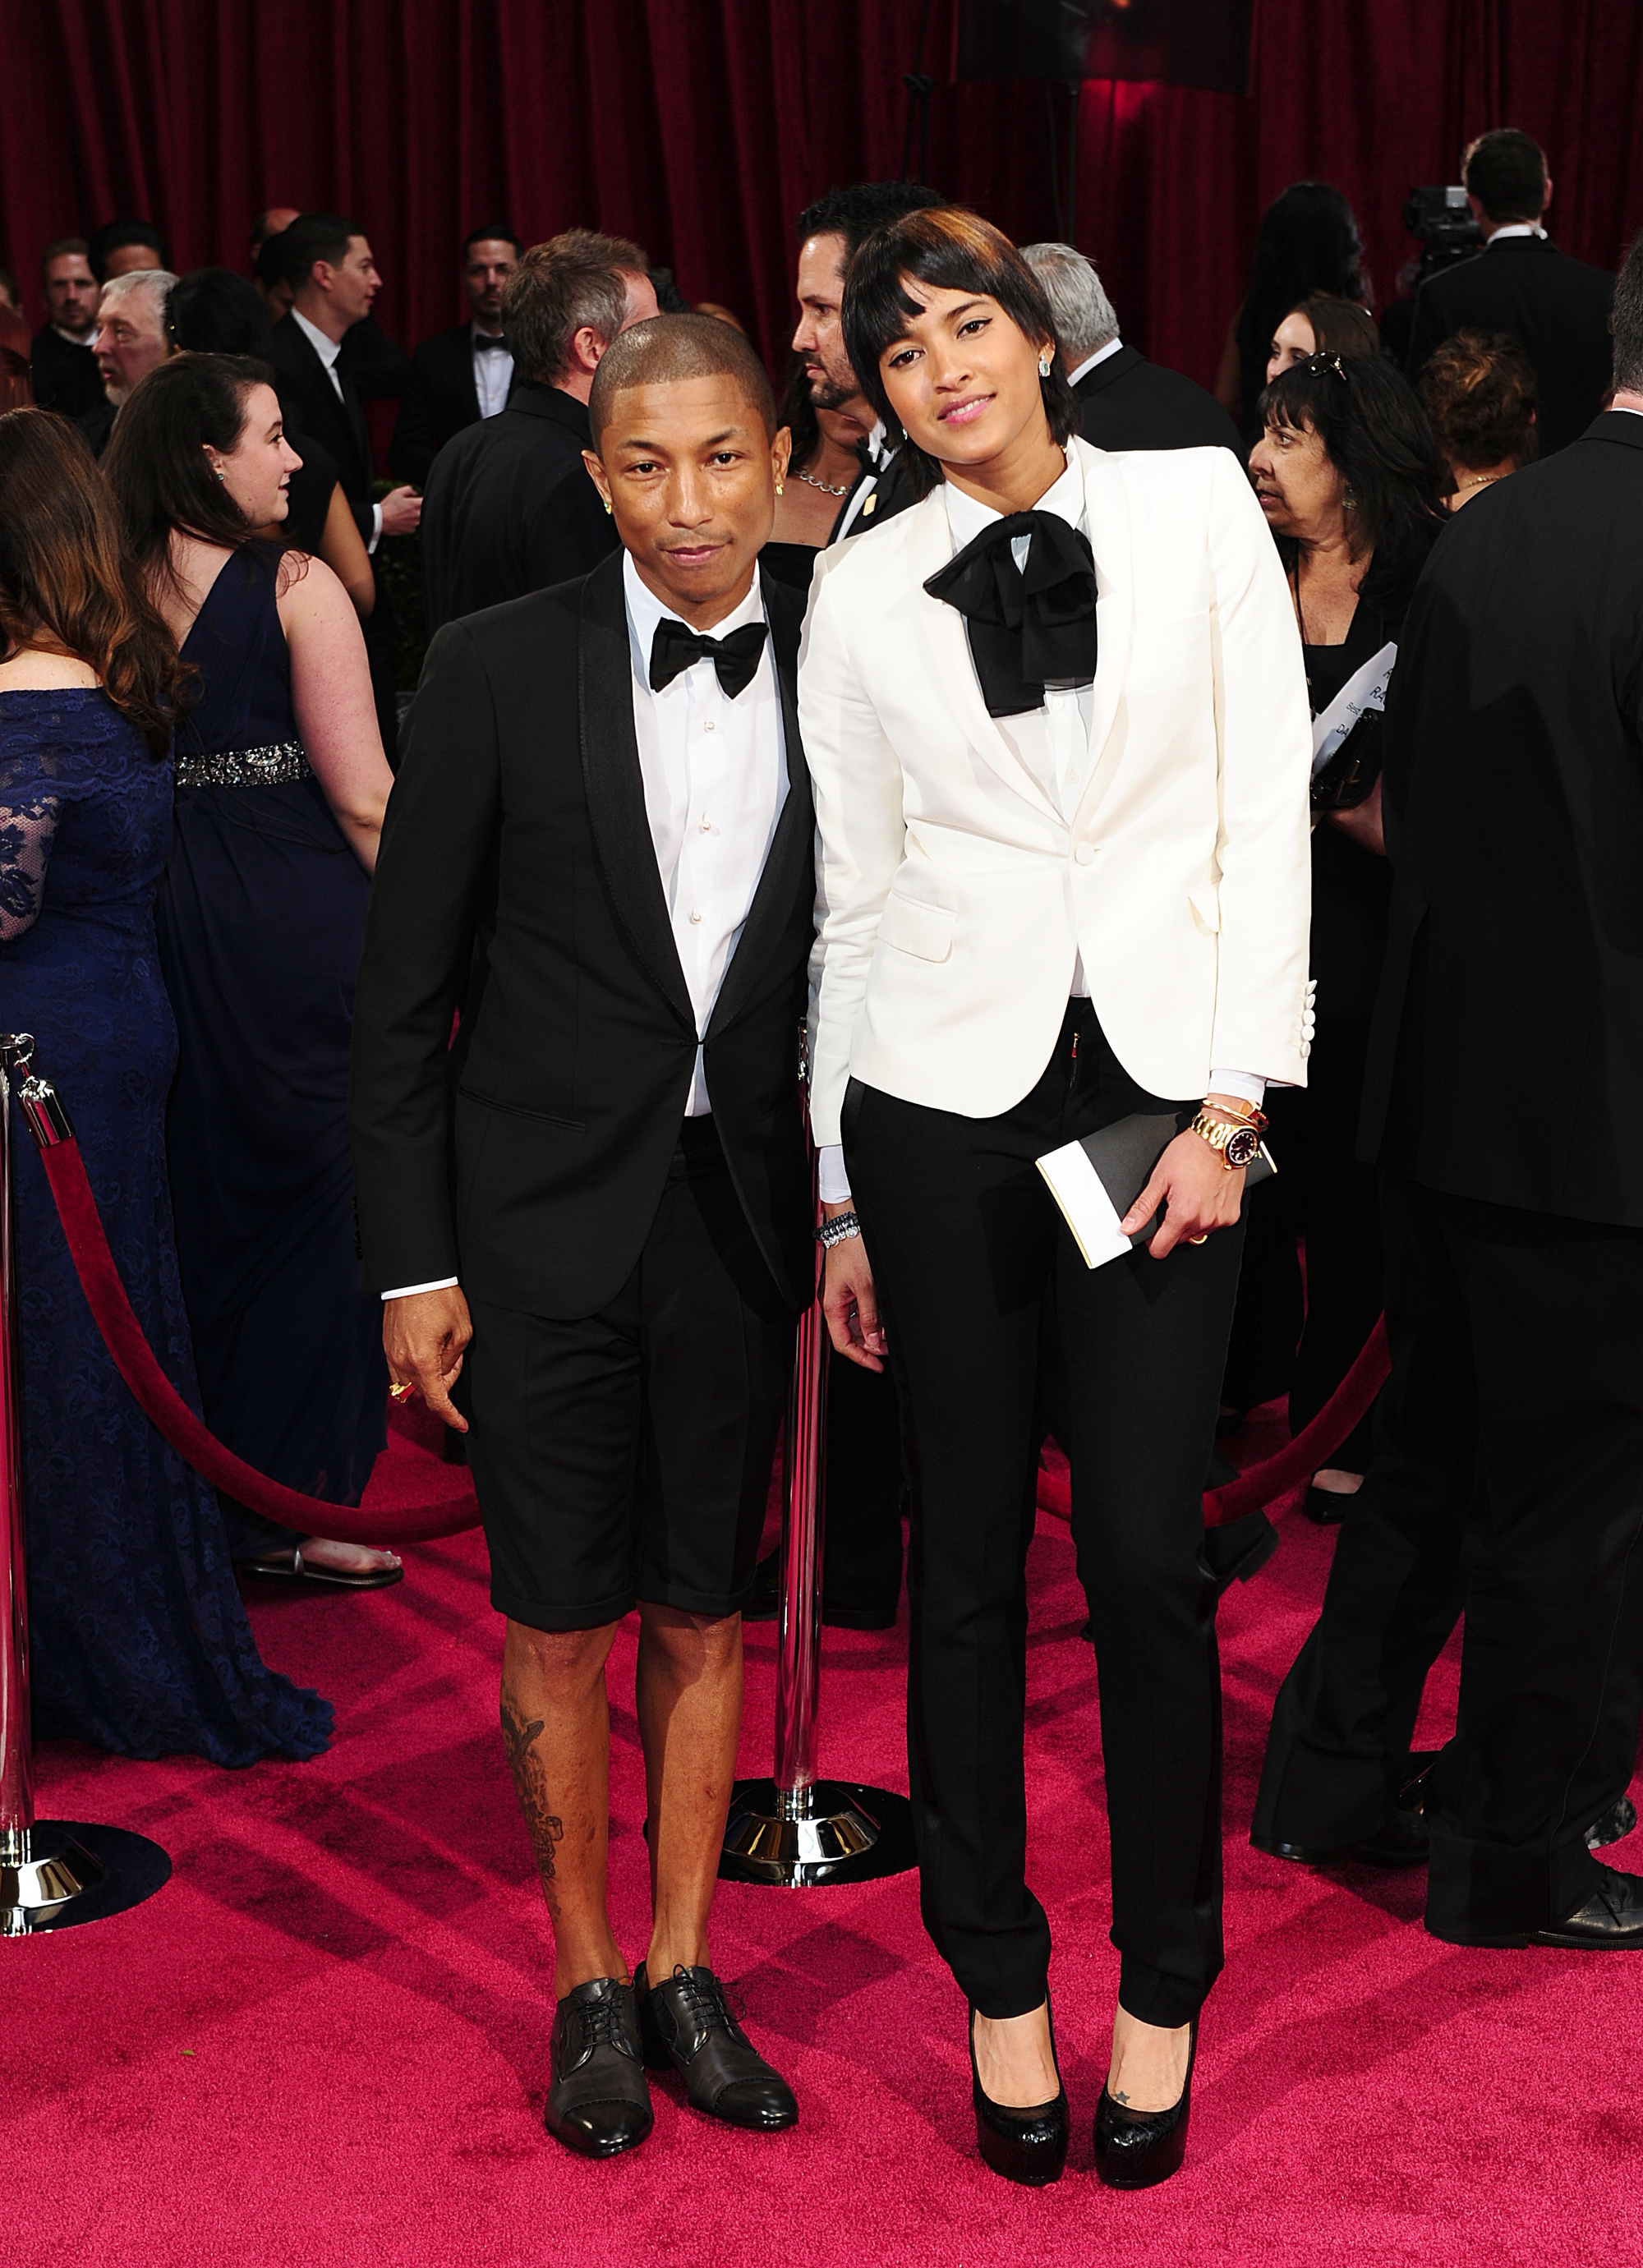 Pharrell Williams and Helen Lasichanh arriving at the 86th Academy Awards 